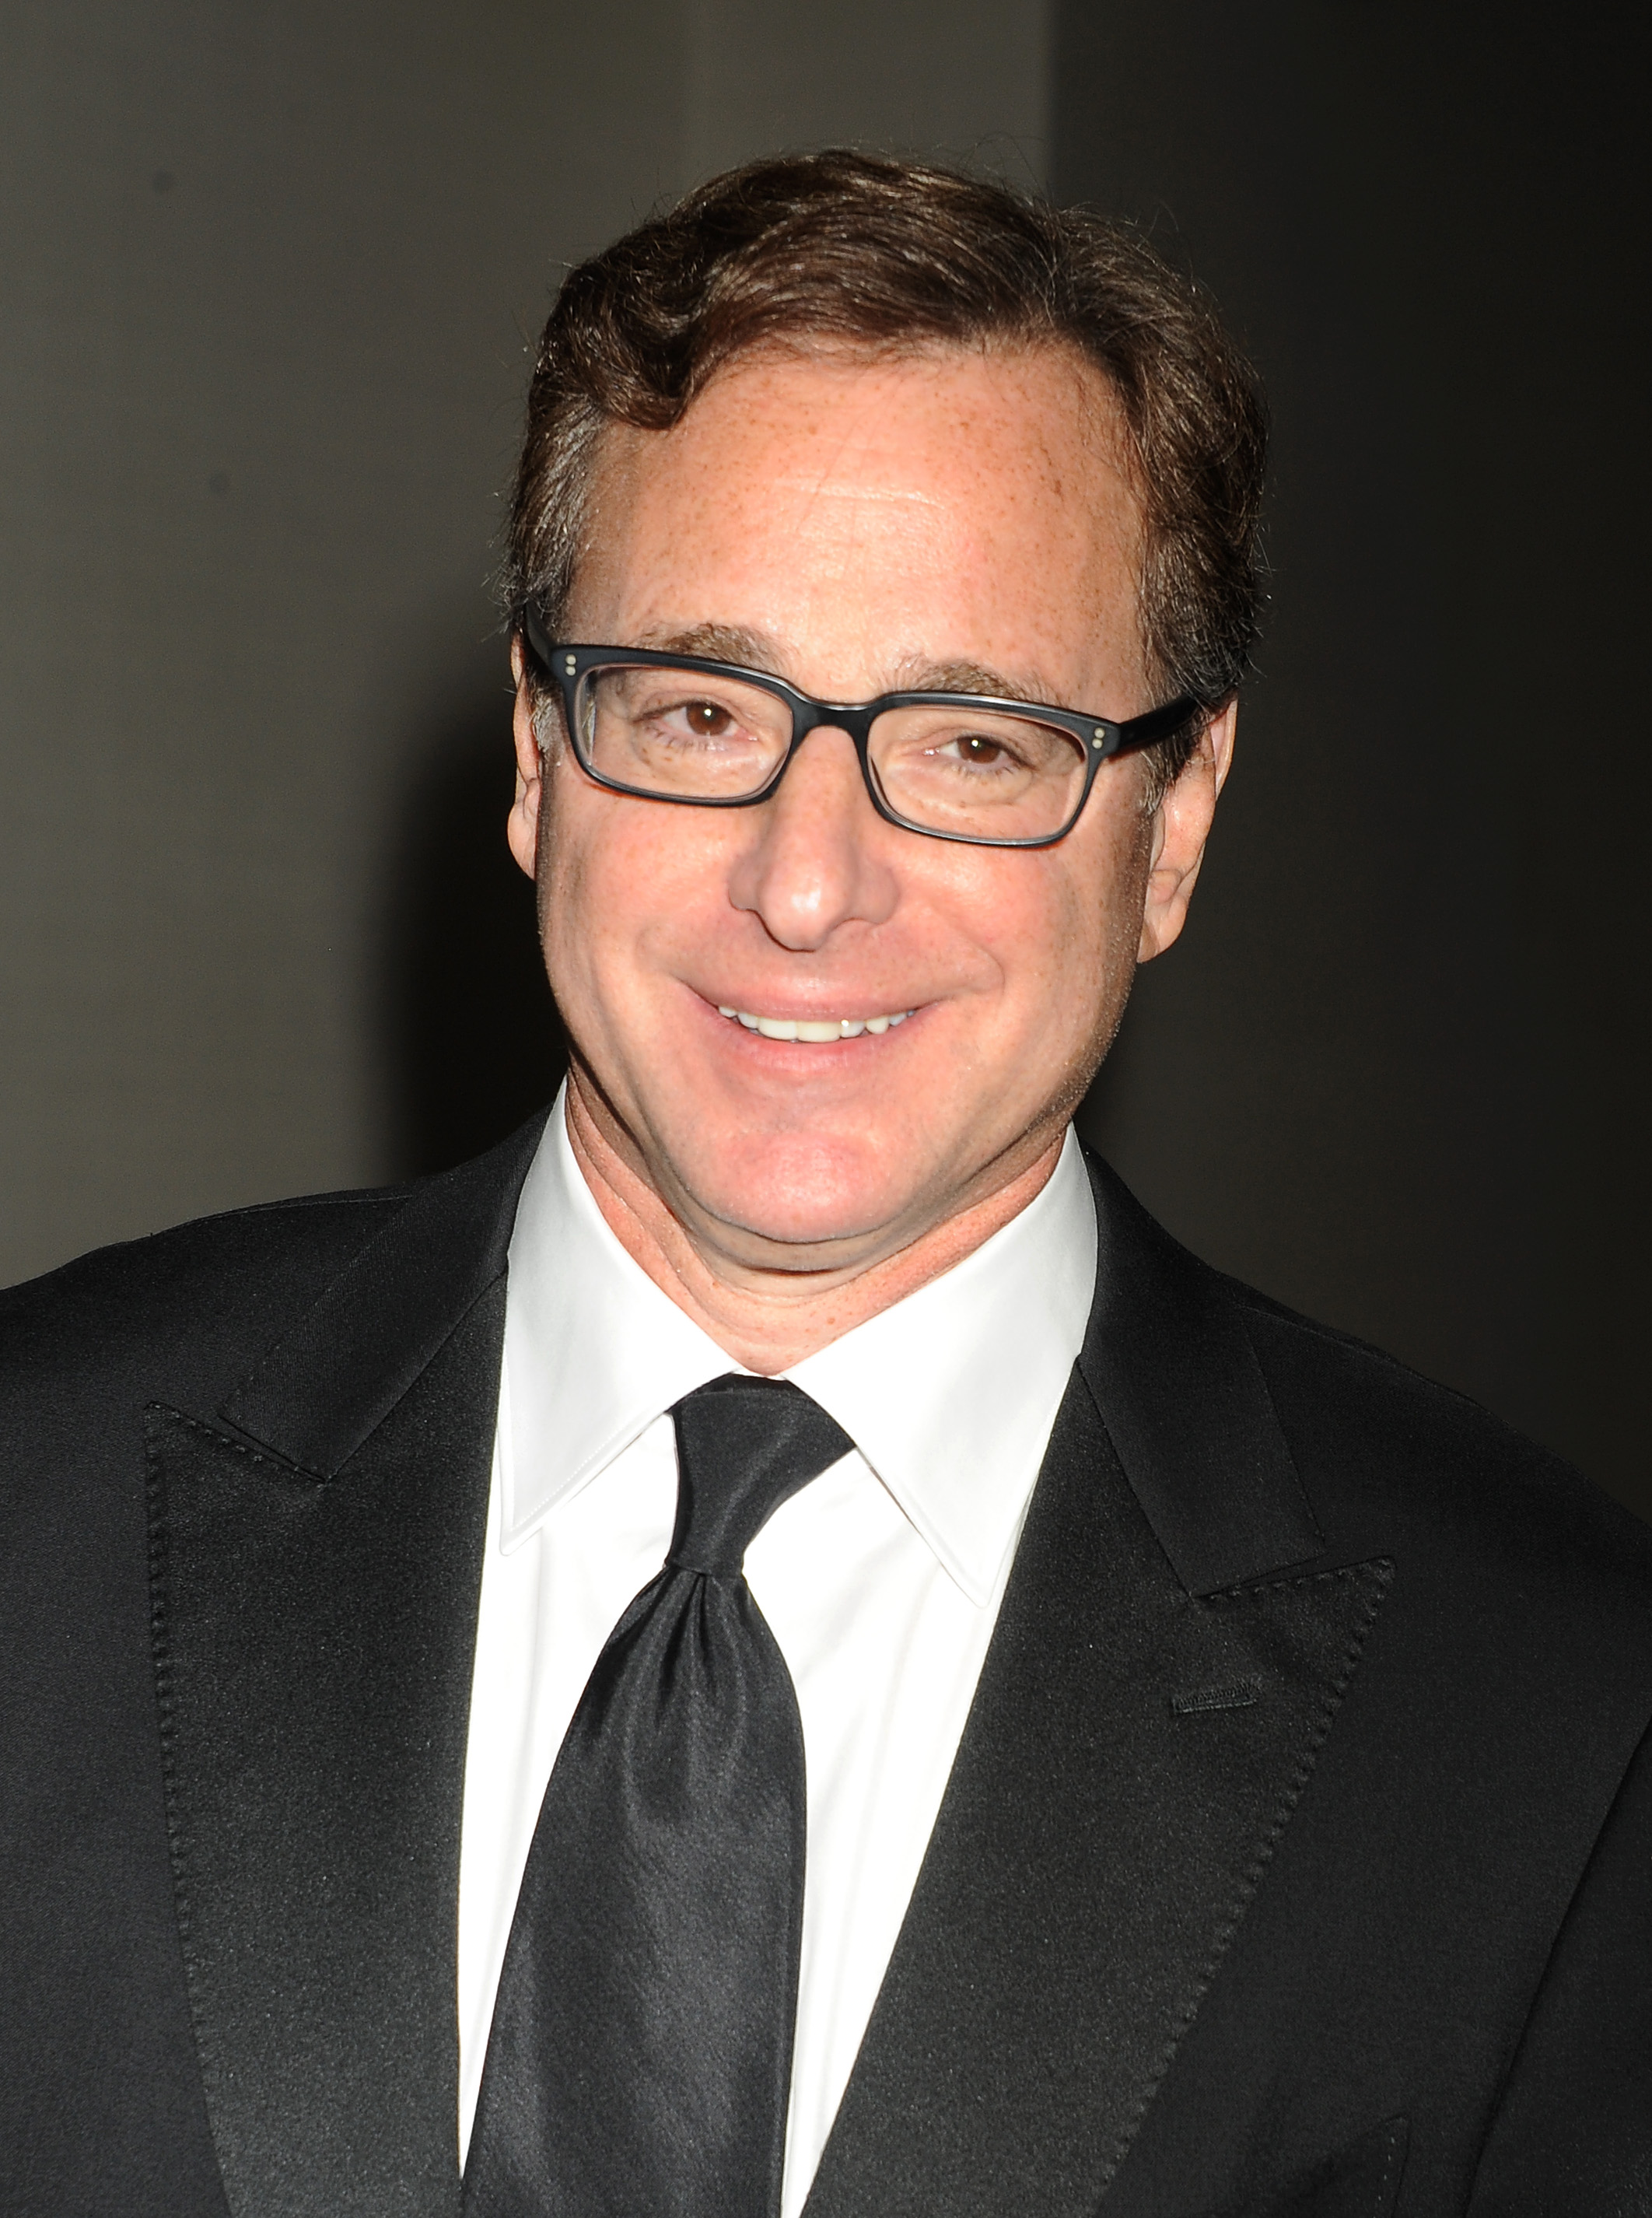 Bob Saget poses during the Writers Guild Awards L.A. Ceremony at the Hyatt Regency Century Plaza in Century City, California on February 14, 2015. | Source: Getty Images